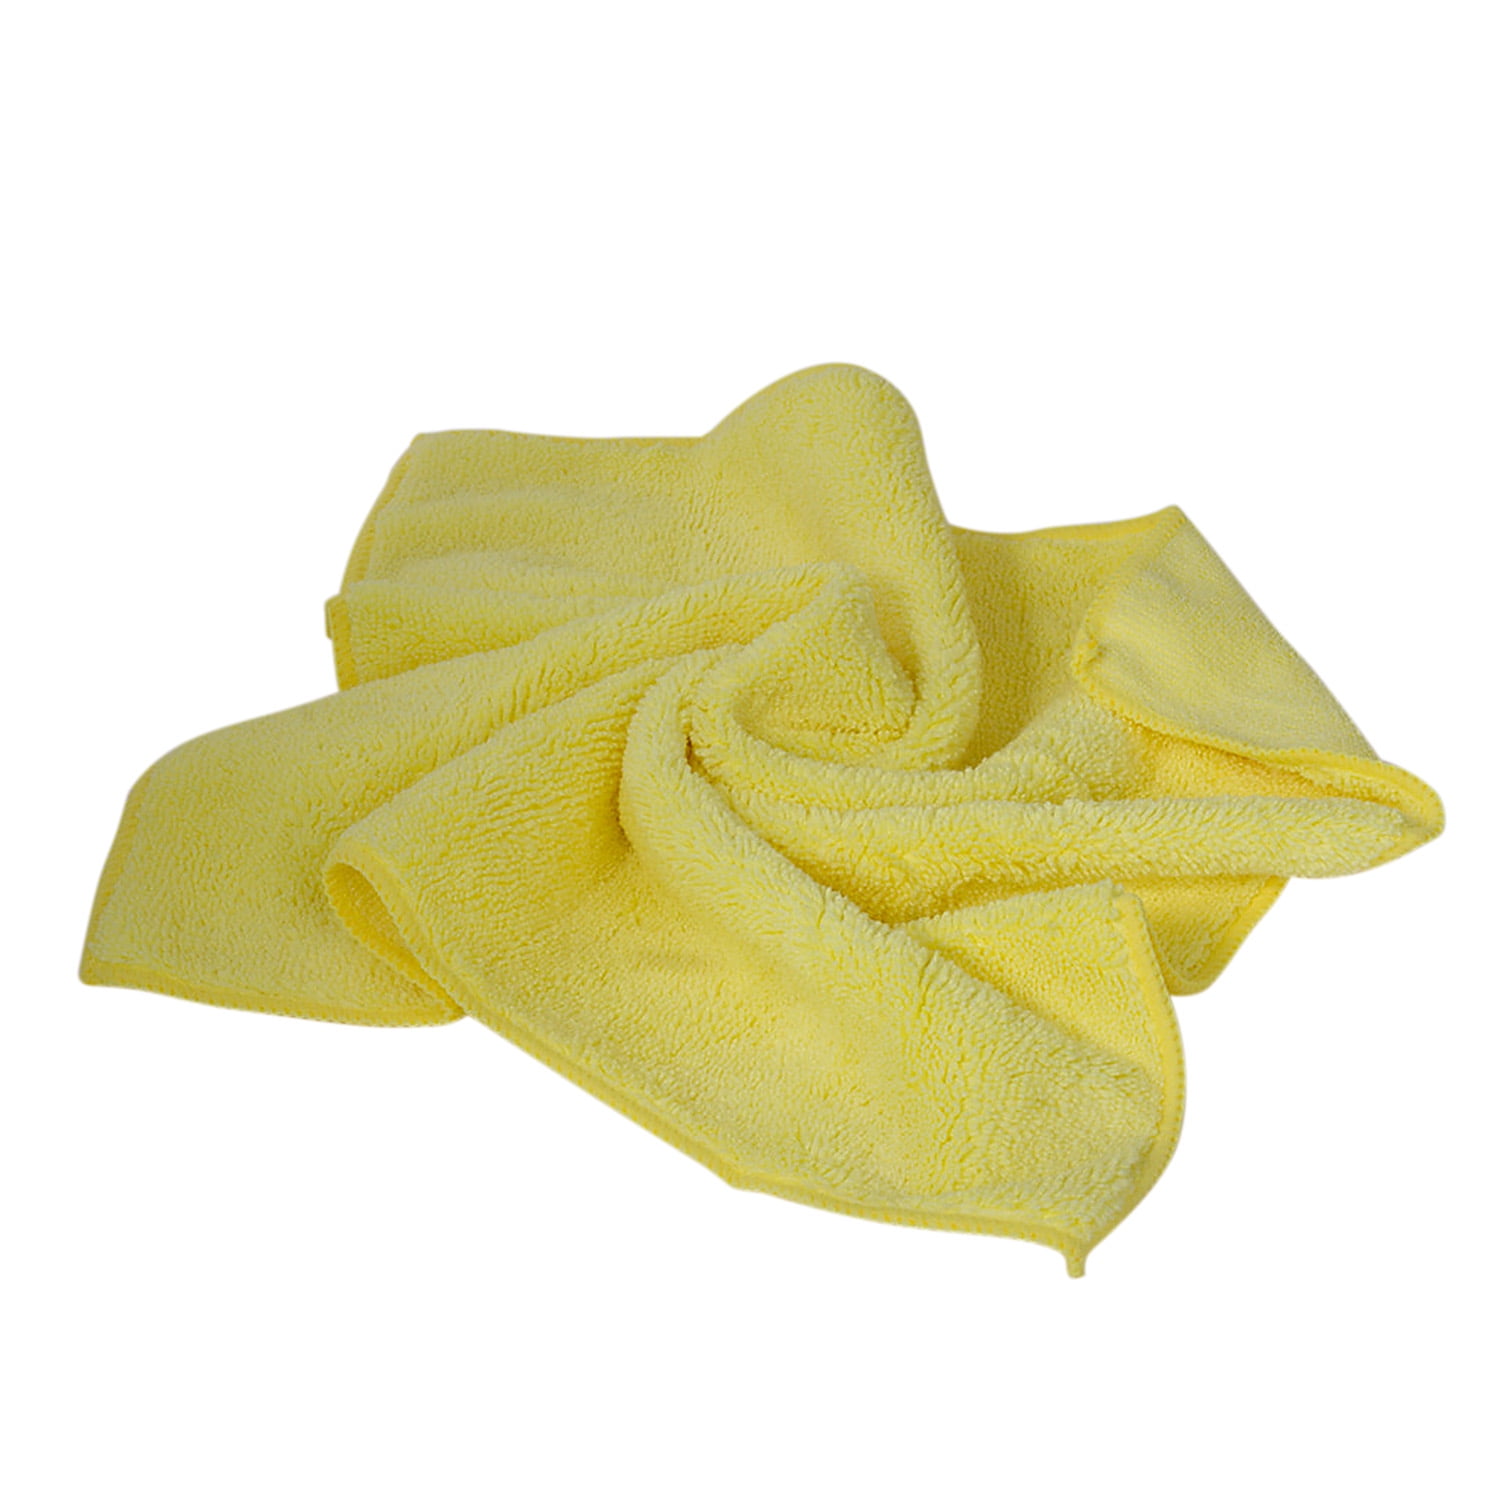 Details about   Large Microfiber Cleaning Cloth Wash Towel Drying Rag Car Polishing Detailing US 